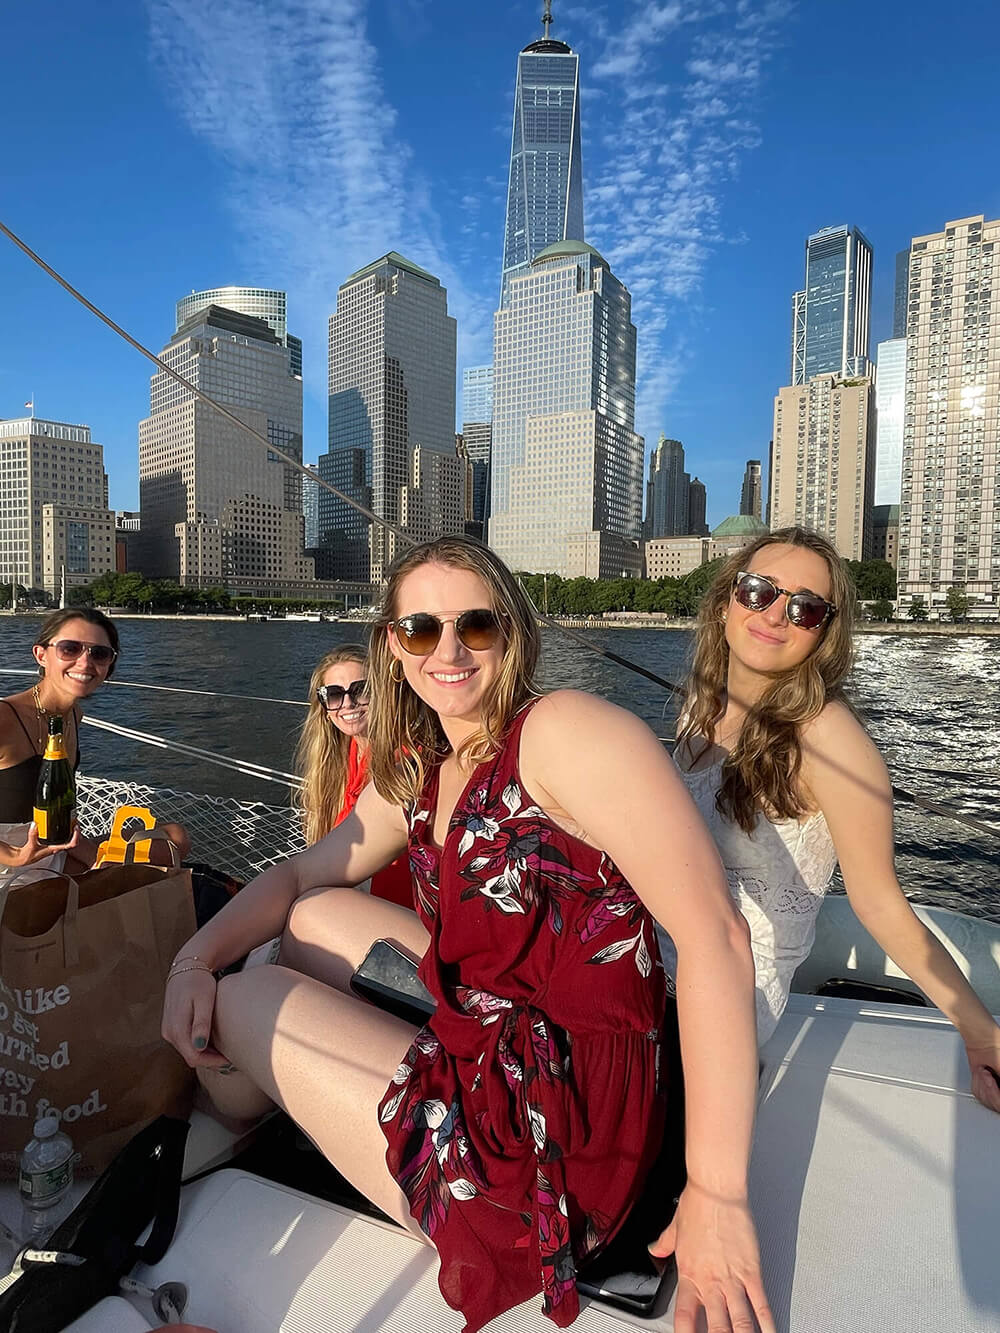 nyc harbor boat tours